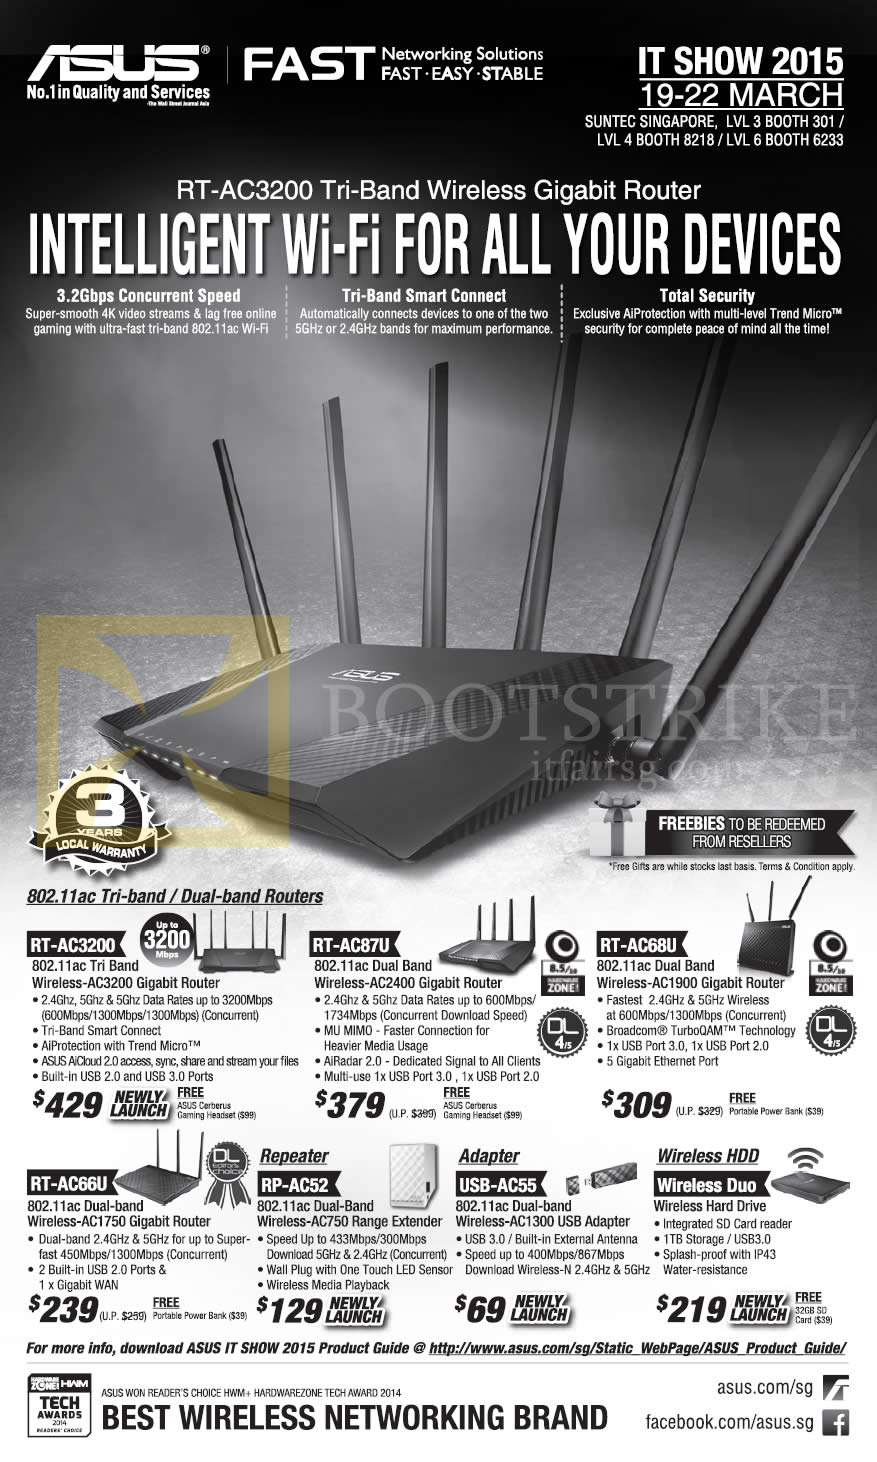 IT SHOW 2015 price list image brochure of ASUS Networking Tri-band, Dual-band Routers, Repeater, Adapter, Wireless HDD, RT-AC3200, RT-AC87U, RT-AC68U, RT-AC66U, RP-AC52, USB-AC55, Wireless Duo